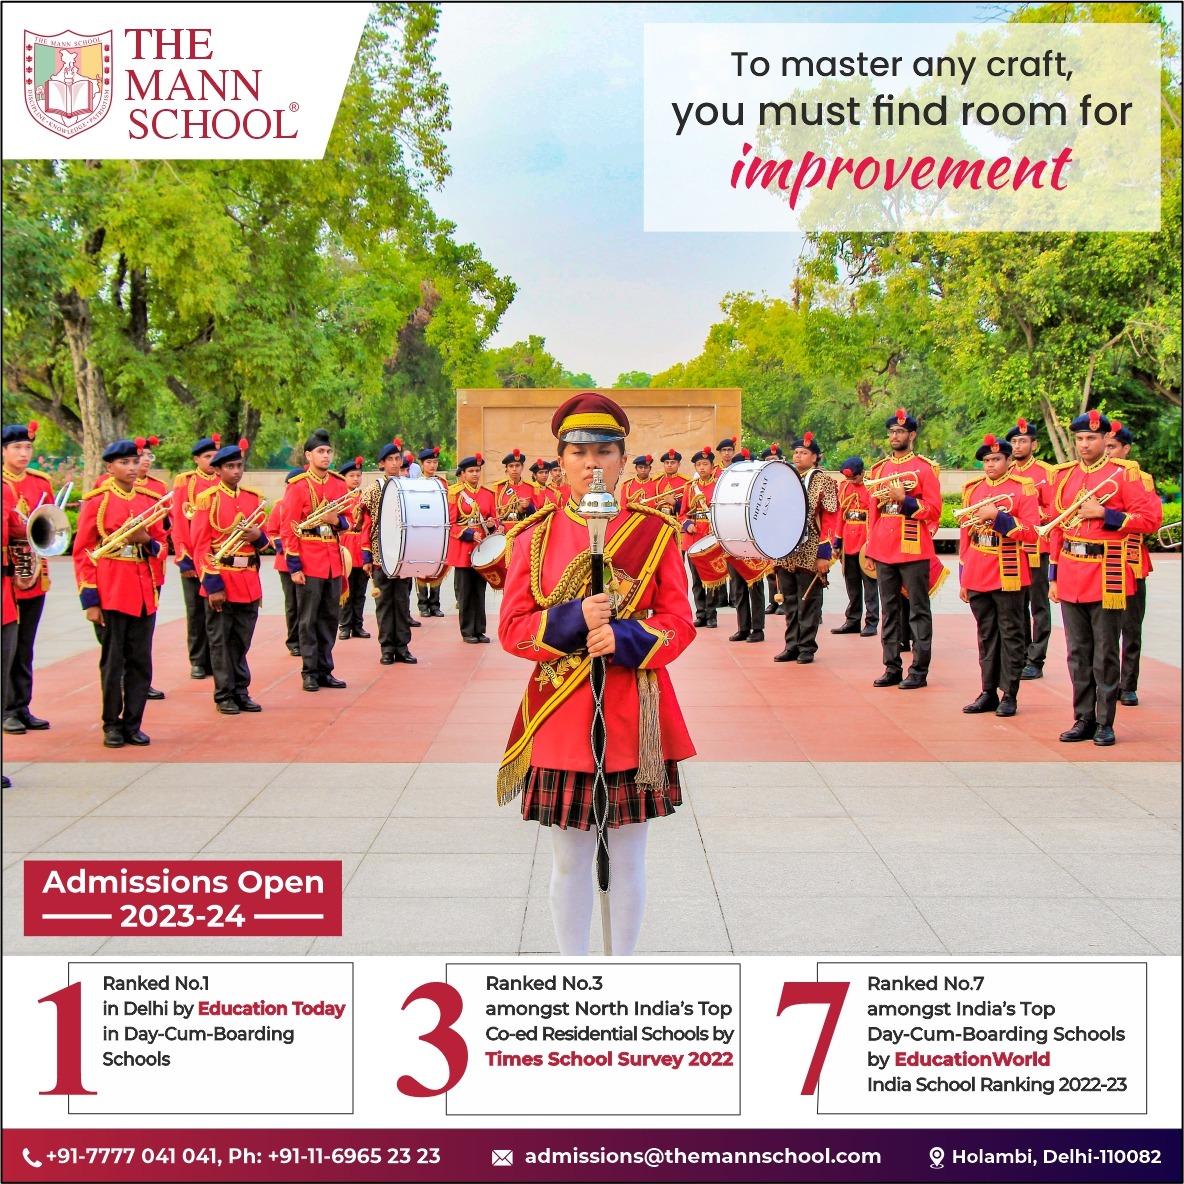 Admissions open in The Mann School, one of the top ranked Co-ed Day-cum-Boarding School located in Delhi